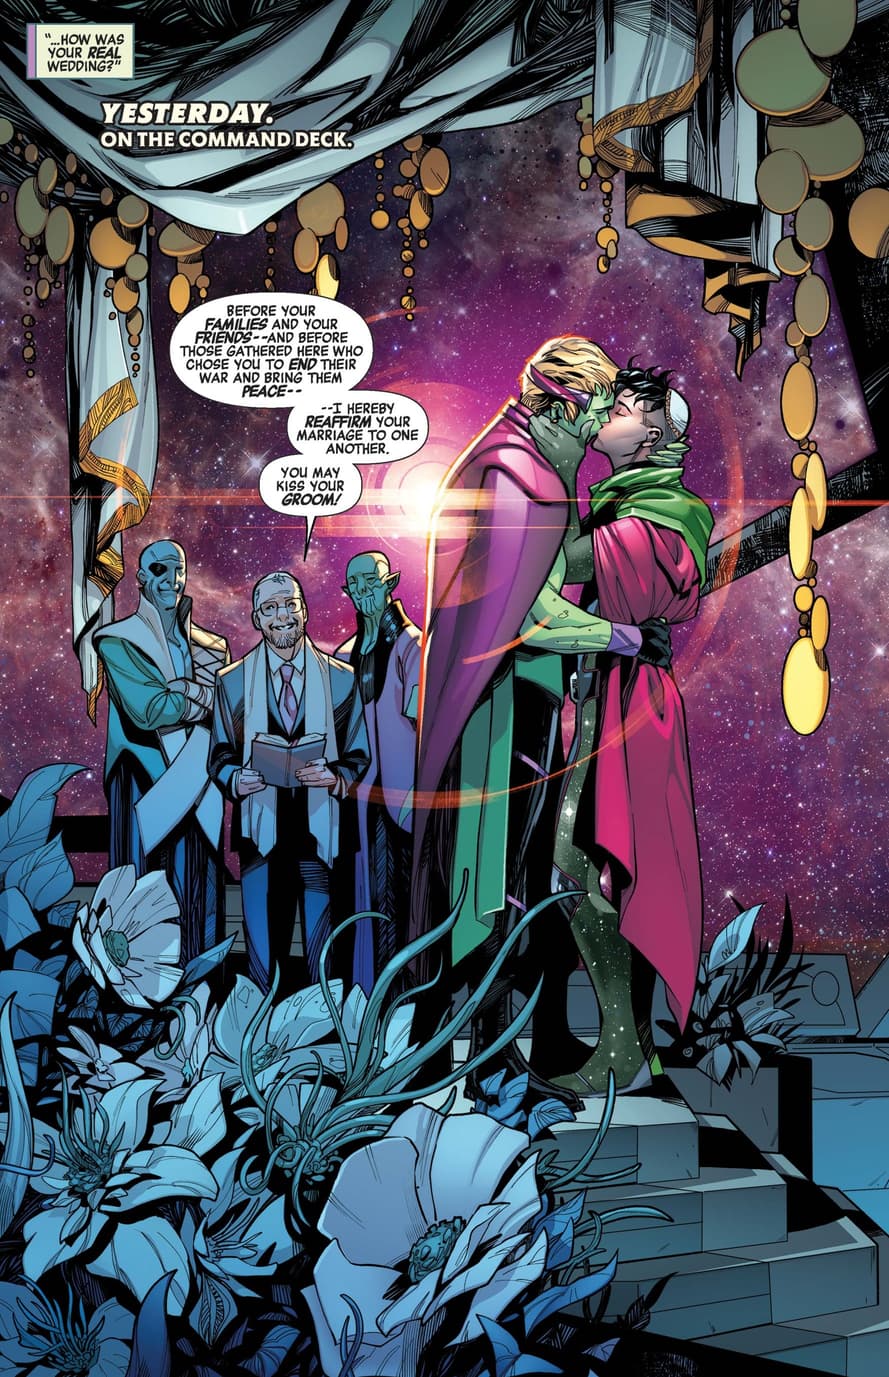 Wiccan marrying into space royalty in EMPYRE: AFTERMATH AVENGERS (2020) #1.